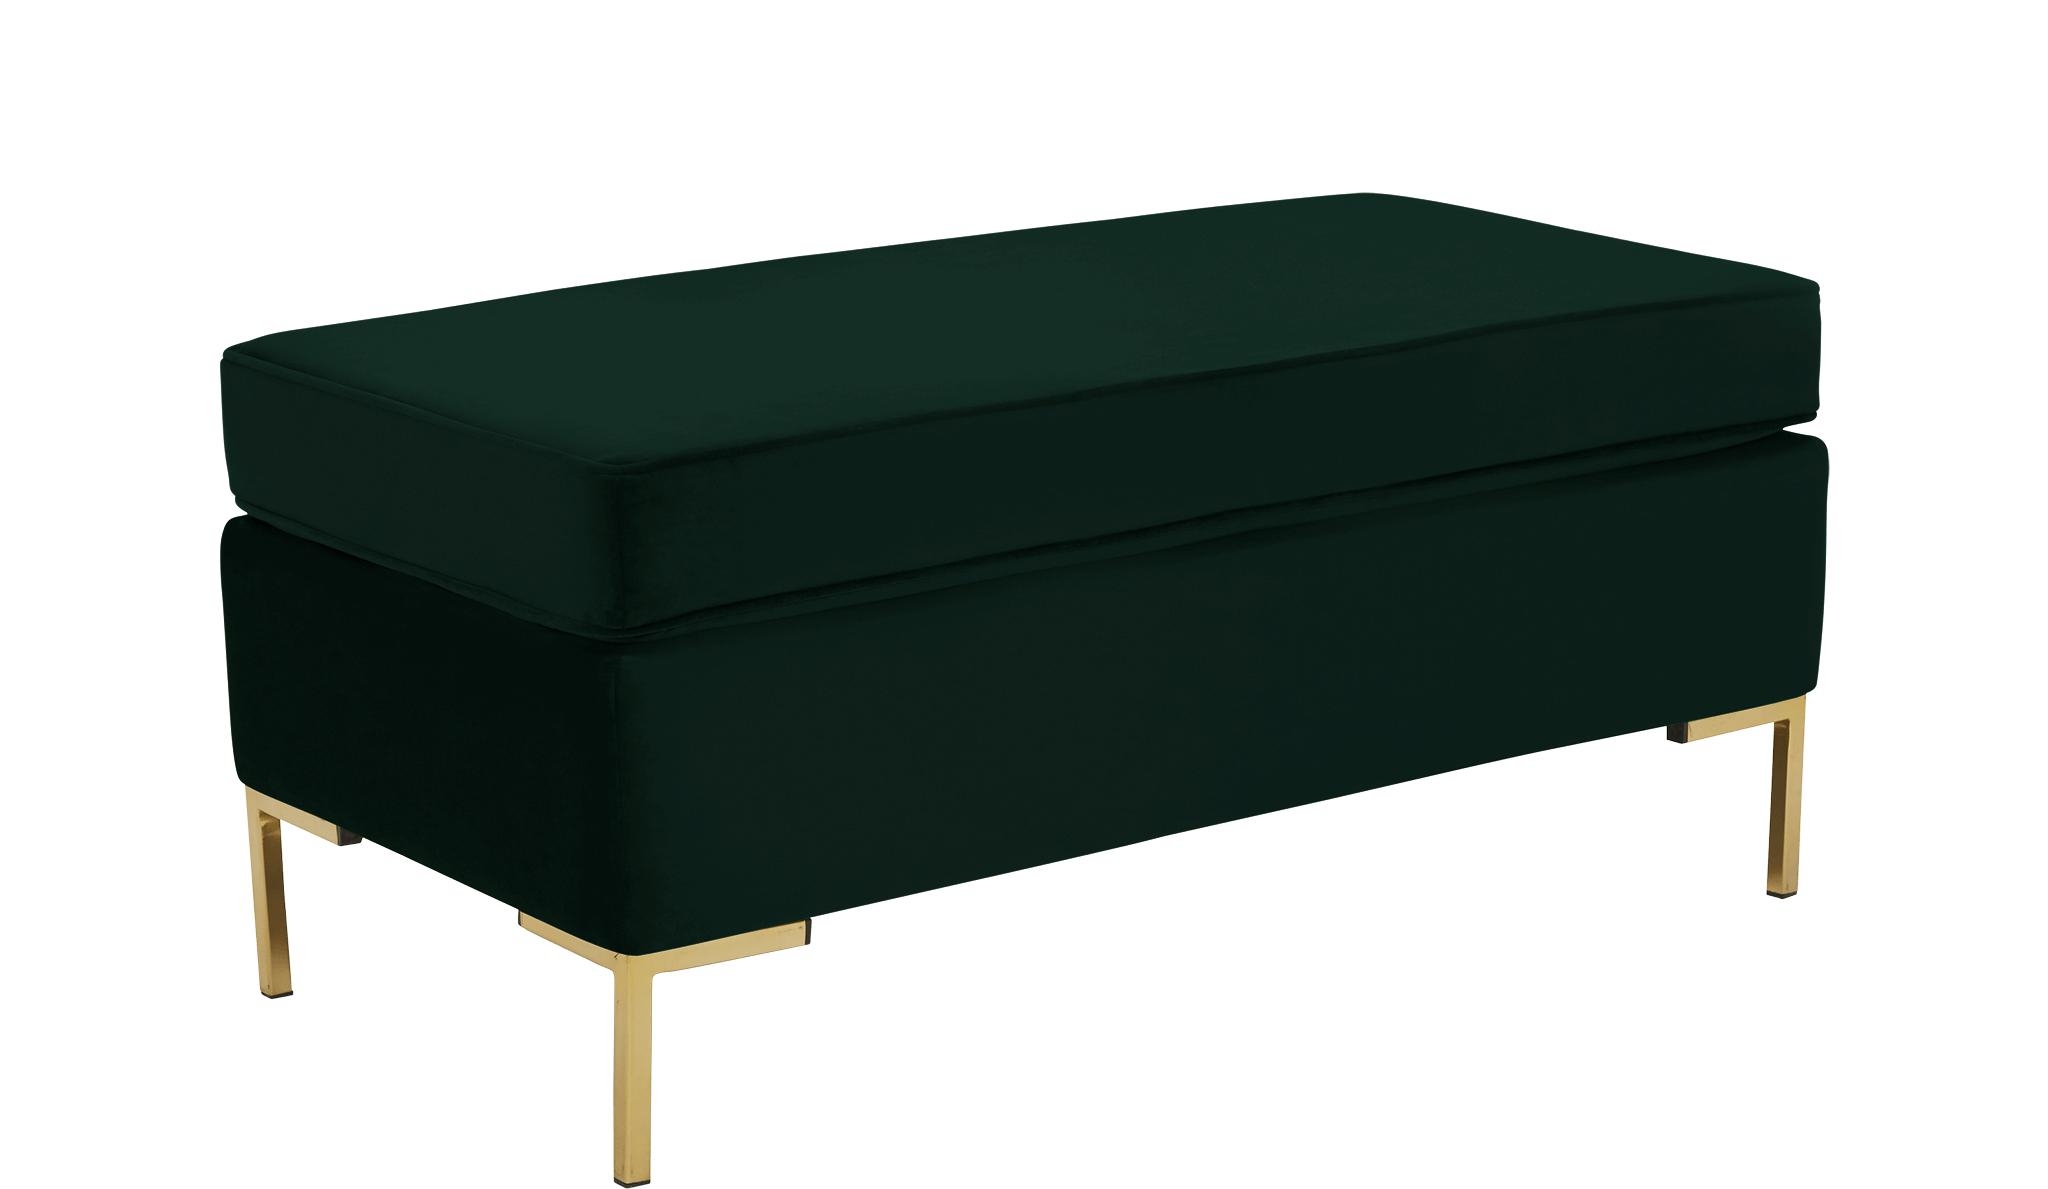 Green Dee Mid Century Modern Bench with Storage - Royale Evergreen - Image 1